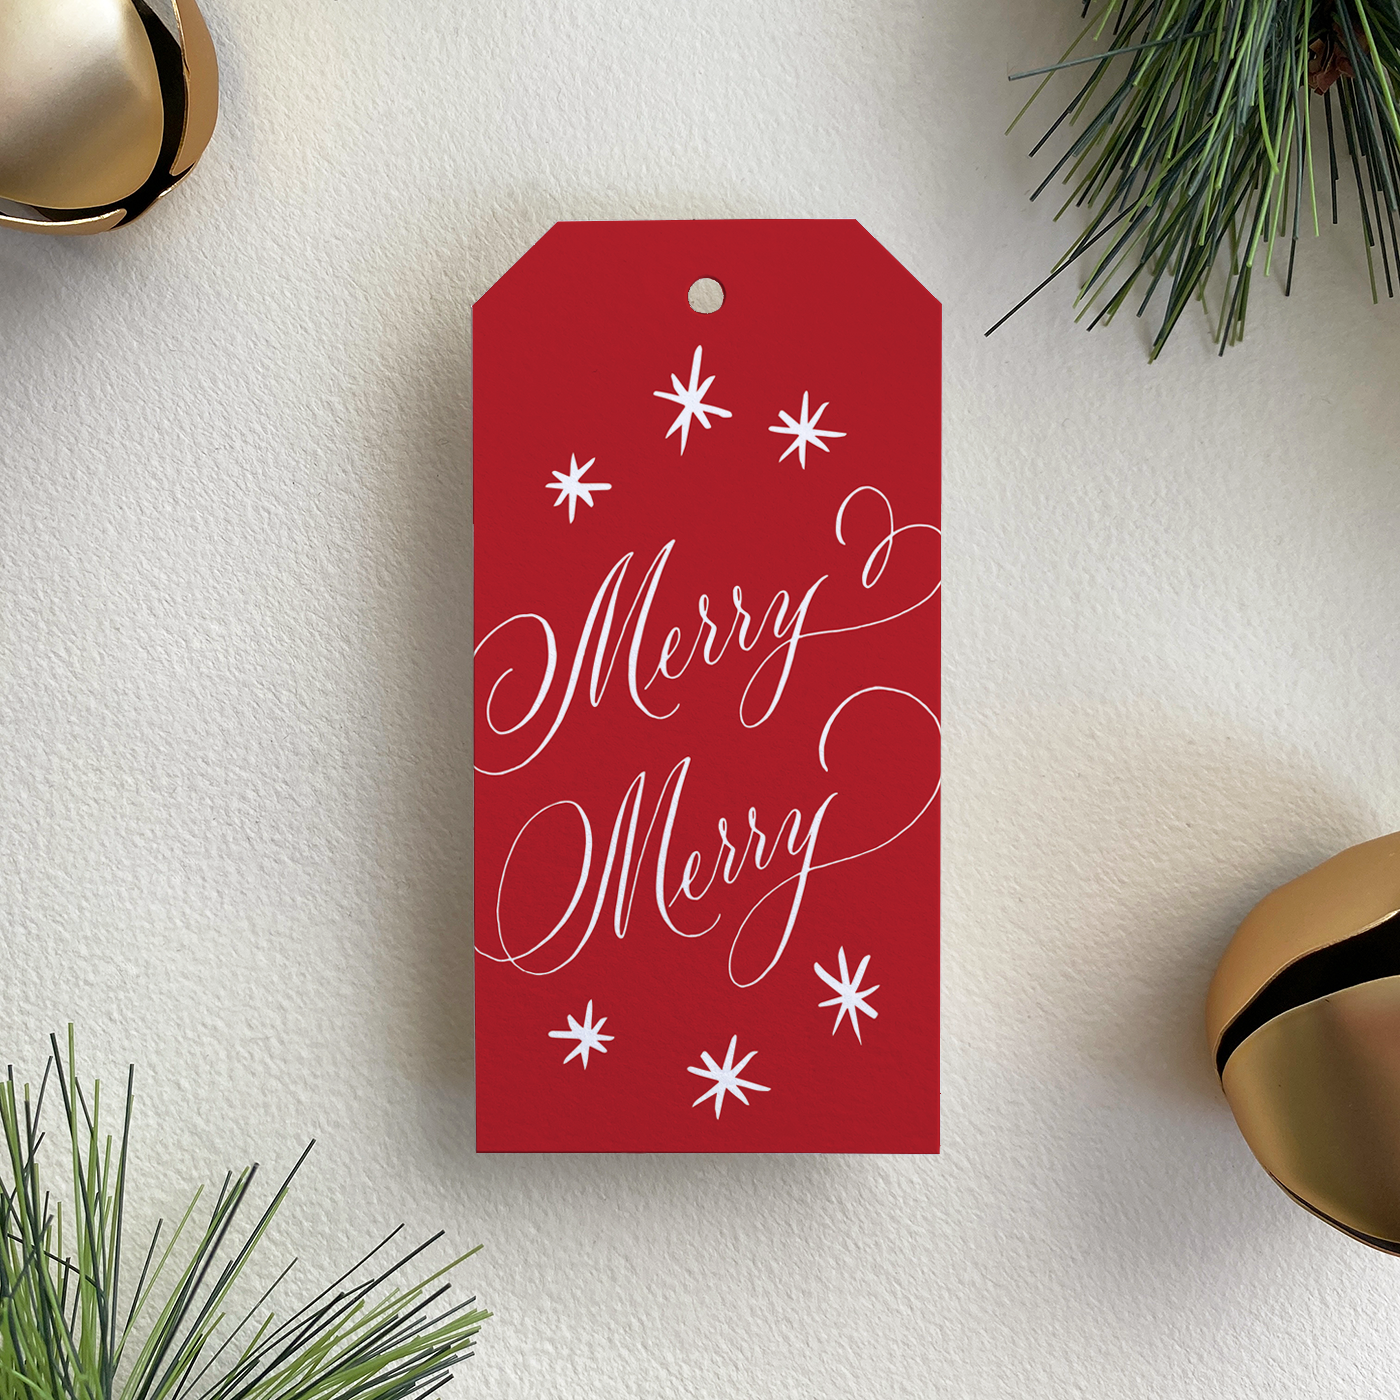 Personalized Merry Merry Gift Tag, Red and White